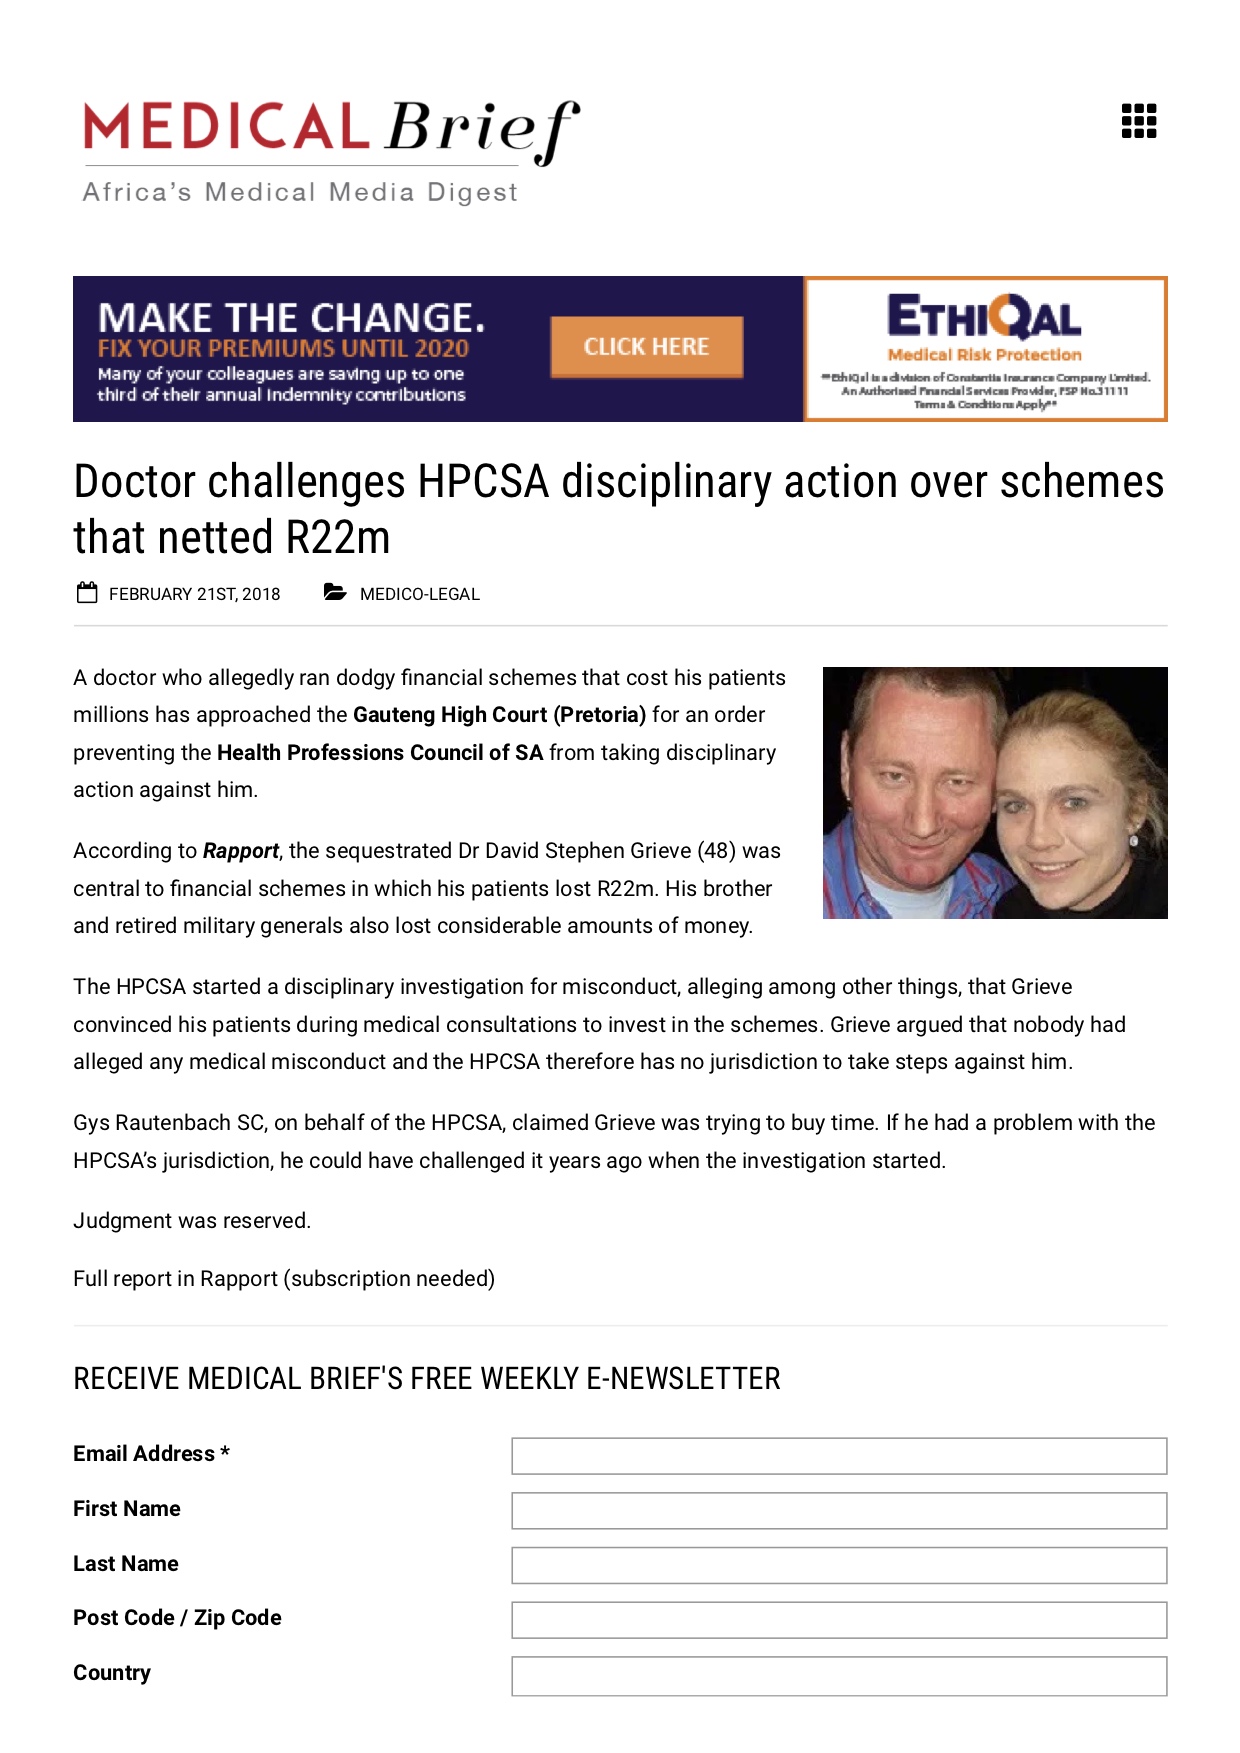 Doctor challenges HPCSA disciplinary ac...hemes that netted R22m - Medical Brief